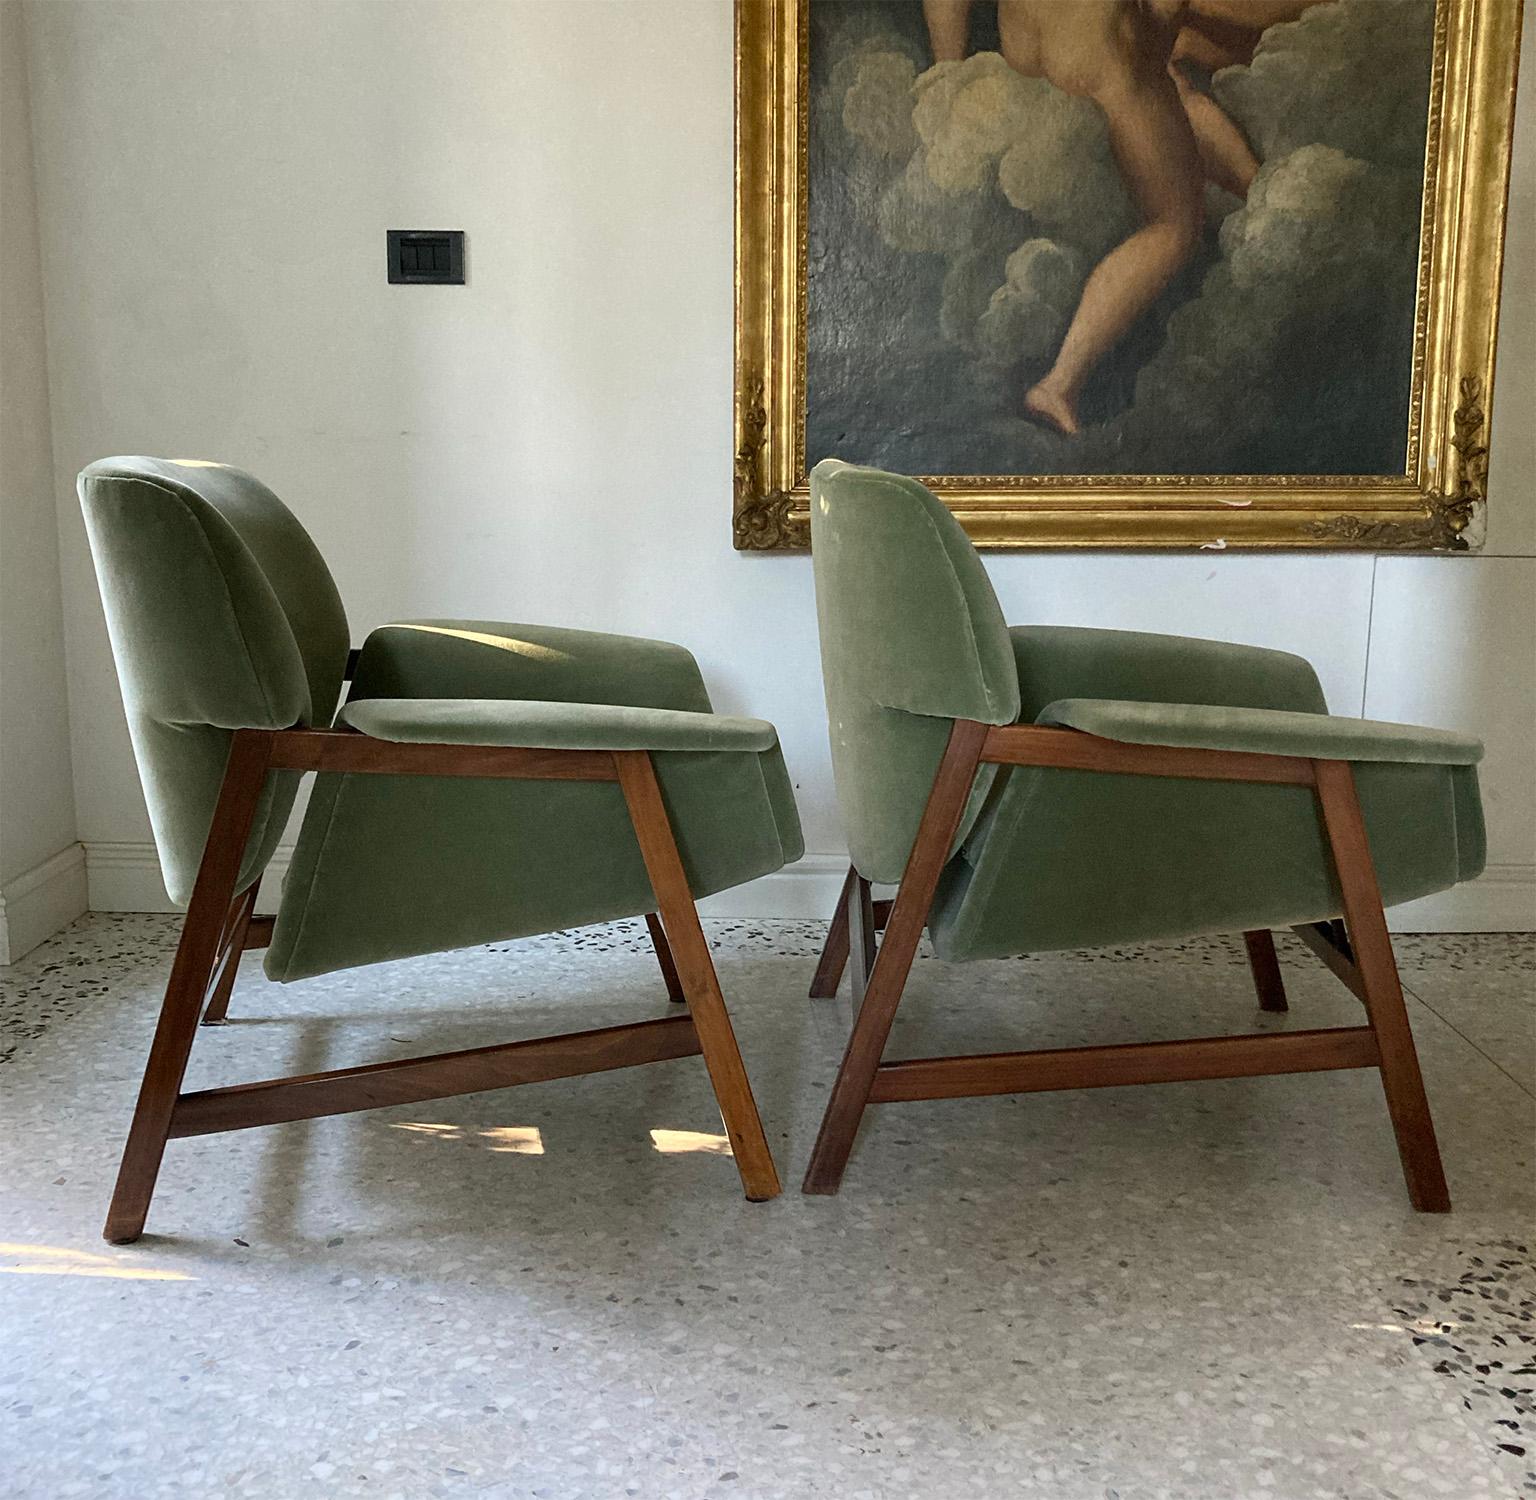 Pair of elegant armchairs, model '849', designed by Gianfranco Frattini for Cassina in circa 1956, walnut with New upholstered Verde Salvia Green velvet.
This model features a walnut frame which holds the seat and backrest. A shell forms the seat